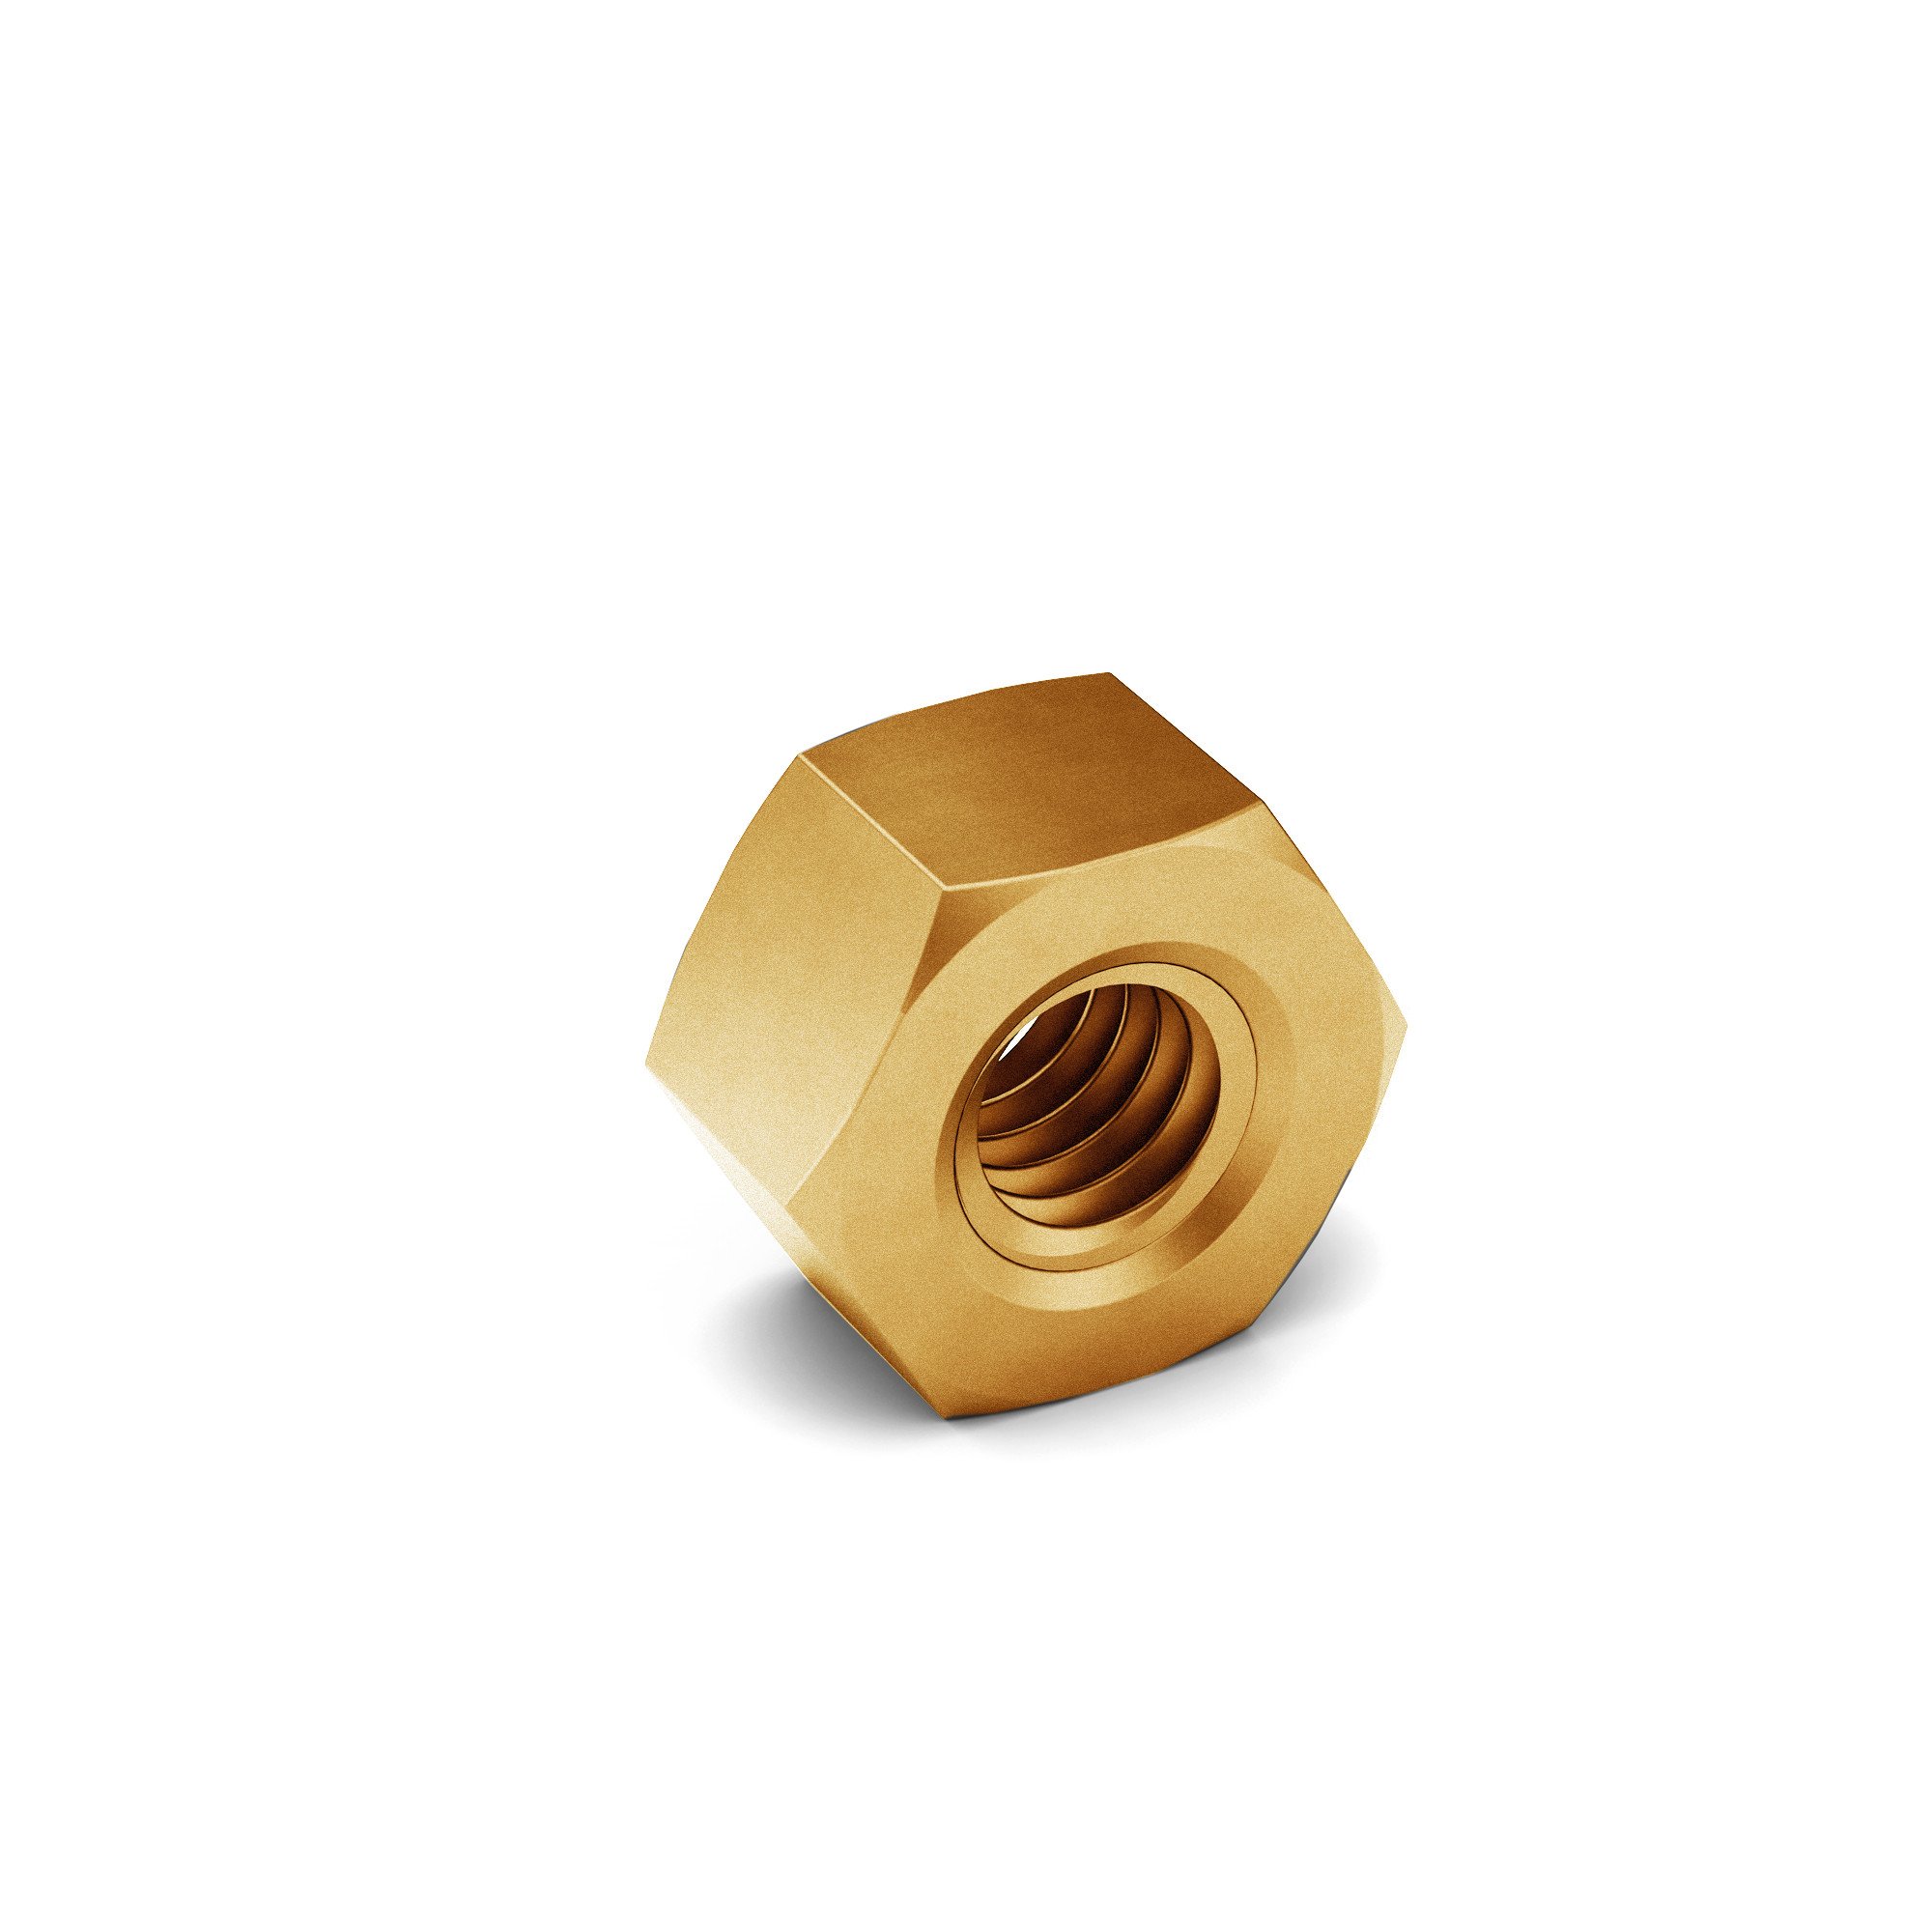 3/8-16 J995 GR 8 Hex Nut Zinc Yellow Made in USA